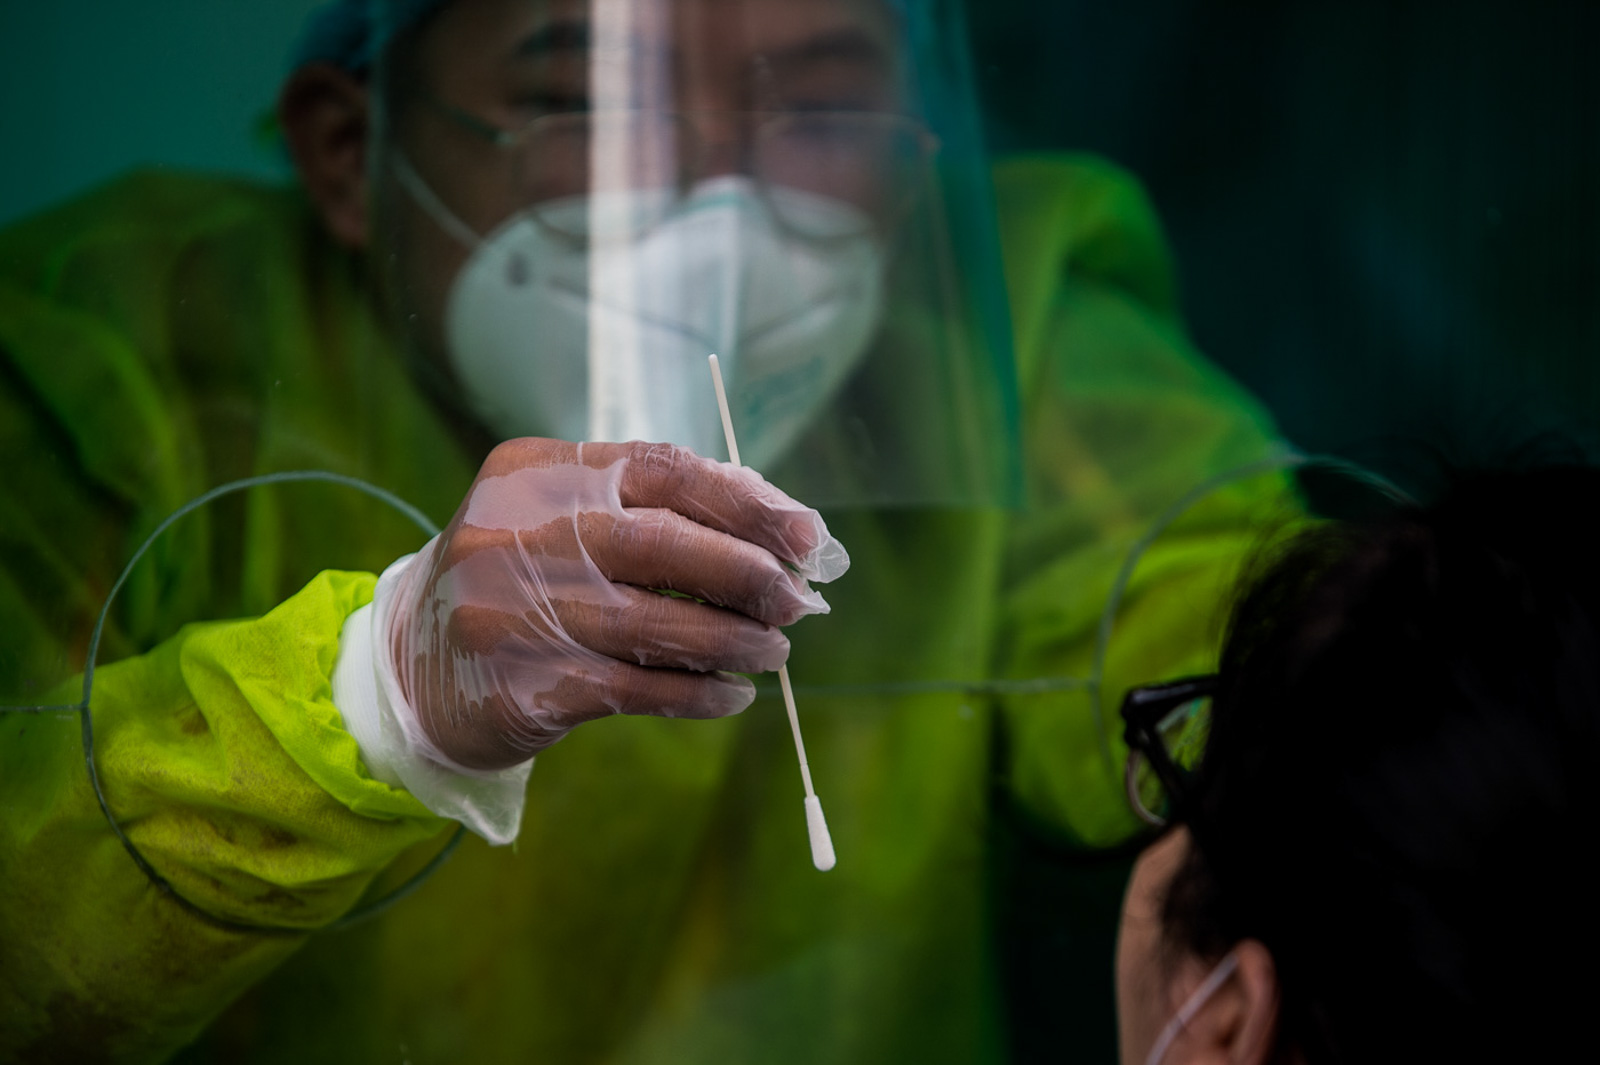 SWABBING. A health worker conducts a swab test on a suspected COVID-19 patient in Sta Ana Hospital in Manila on April 17, 2020. Photo by Lisa Marie David/Rappler  